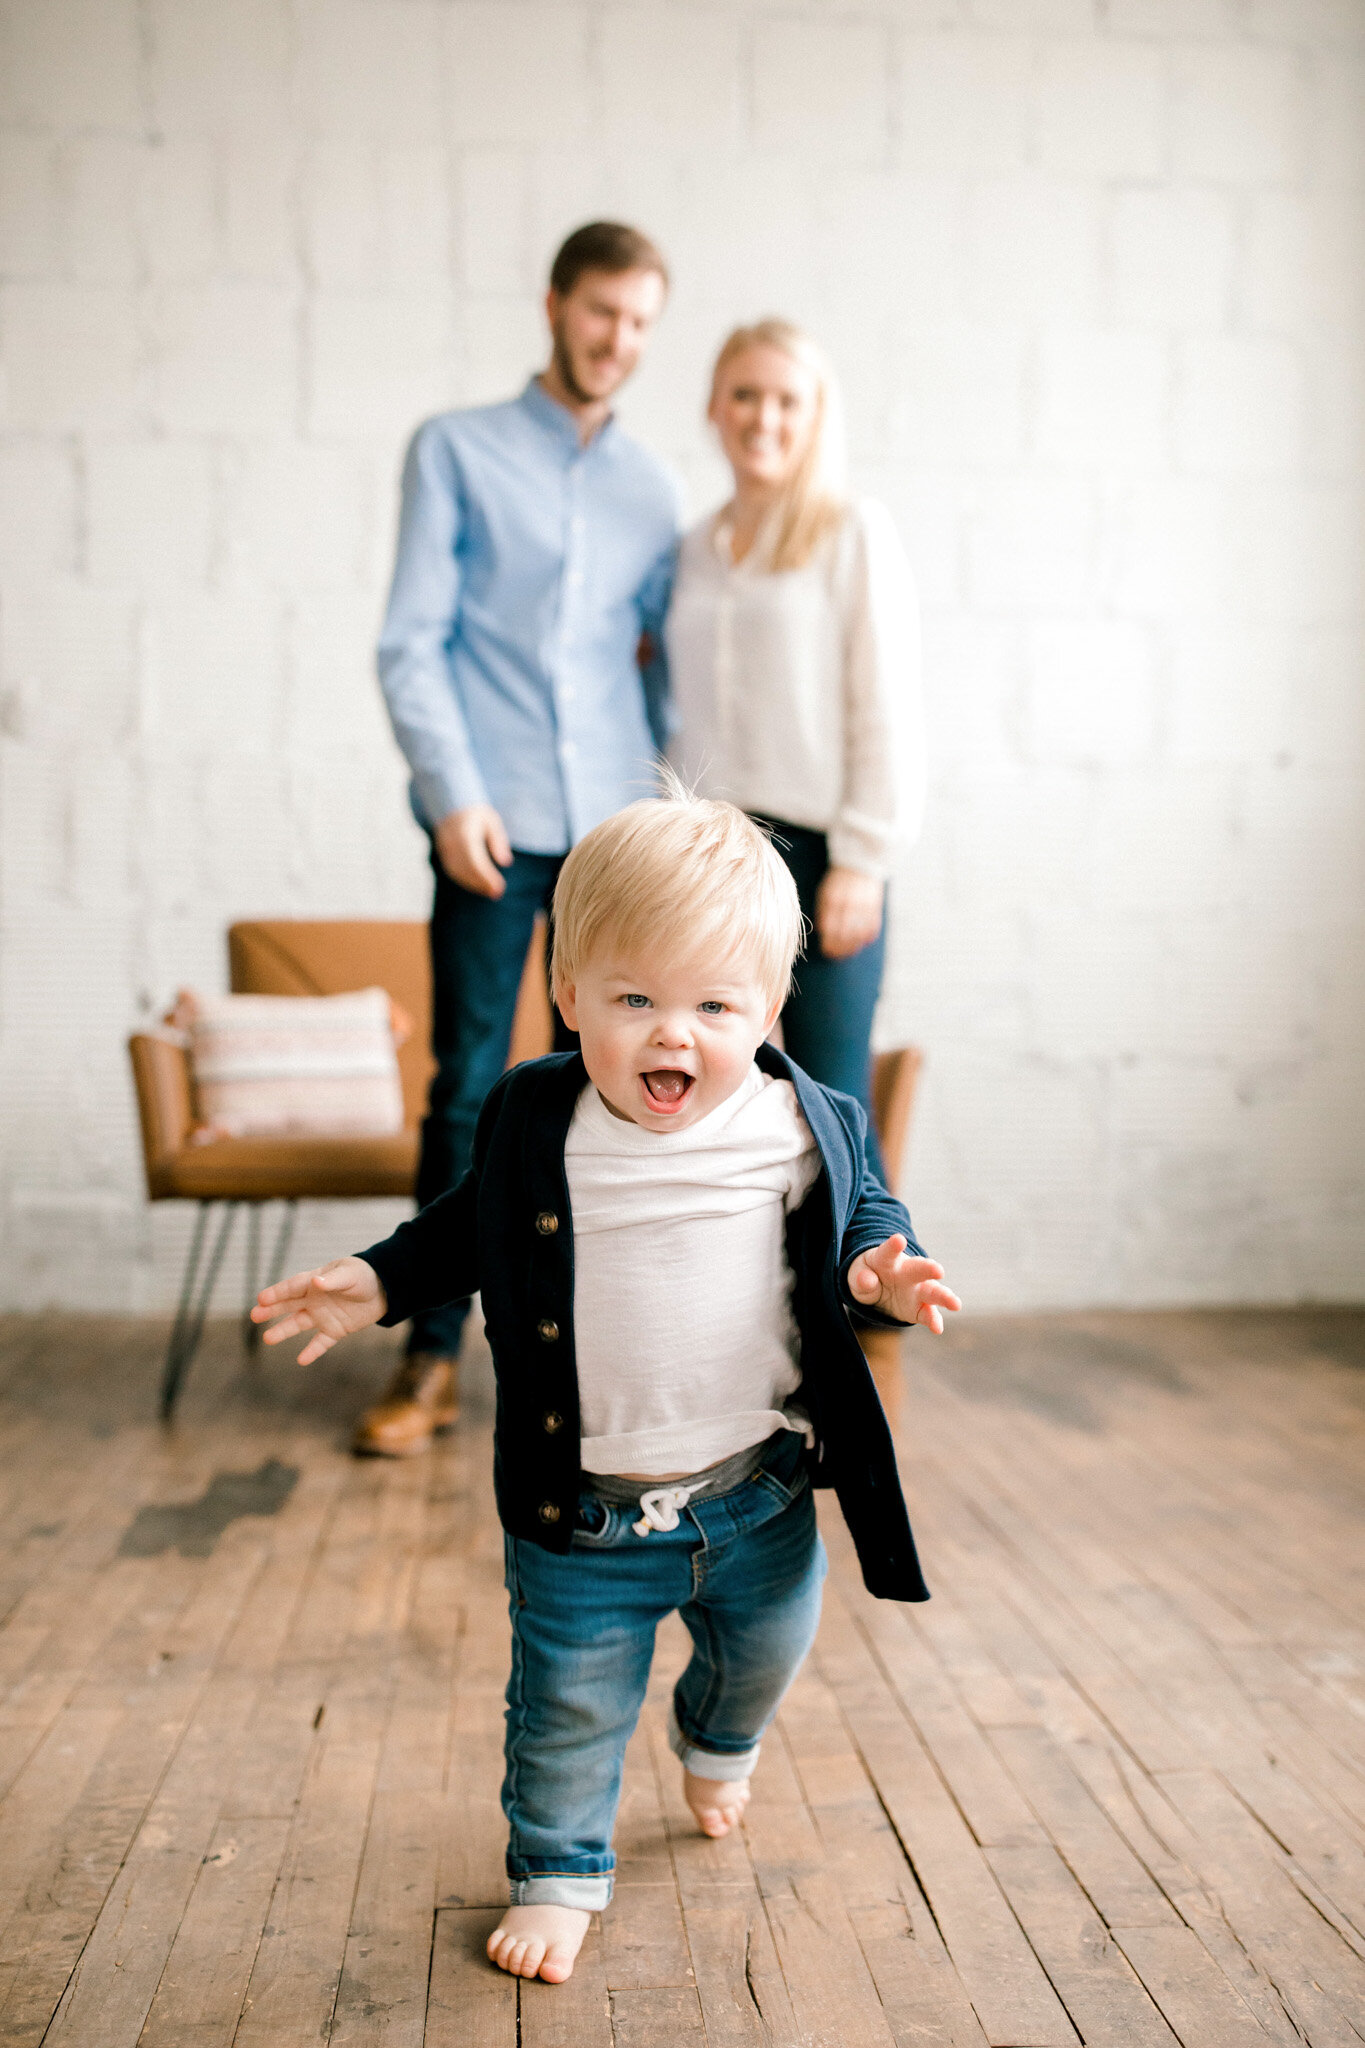 One Year Baby Boy Photo Session | First Birthday Photo Ideas | Grand Rapids Family Photographer